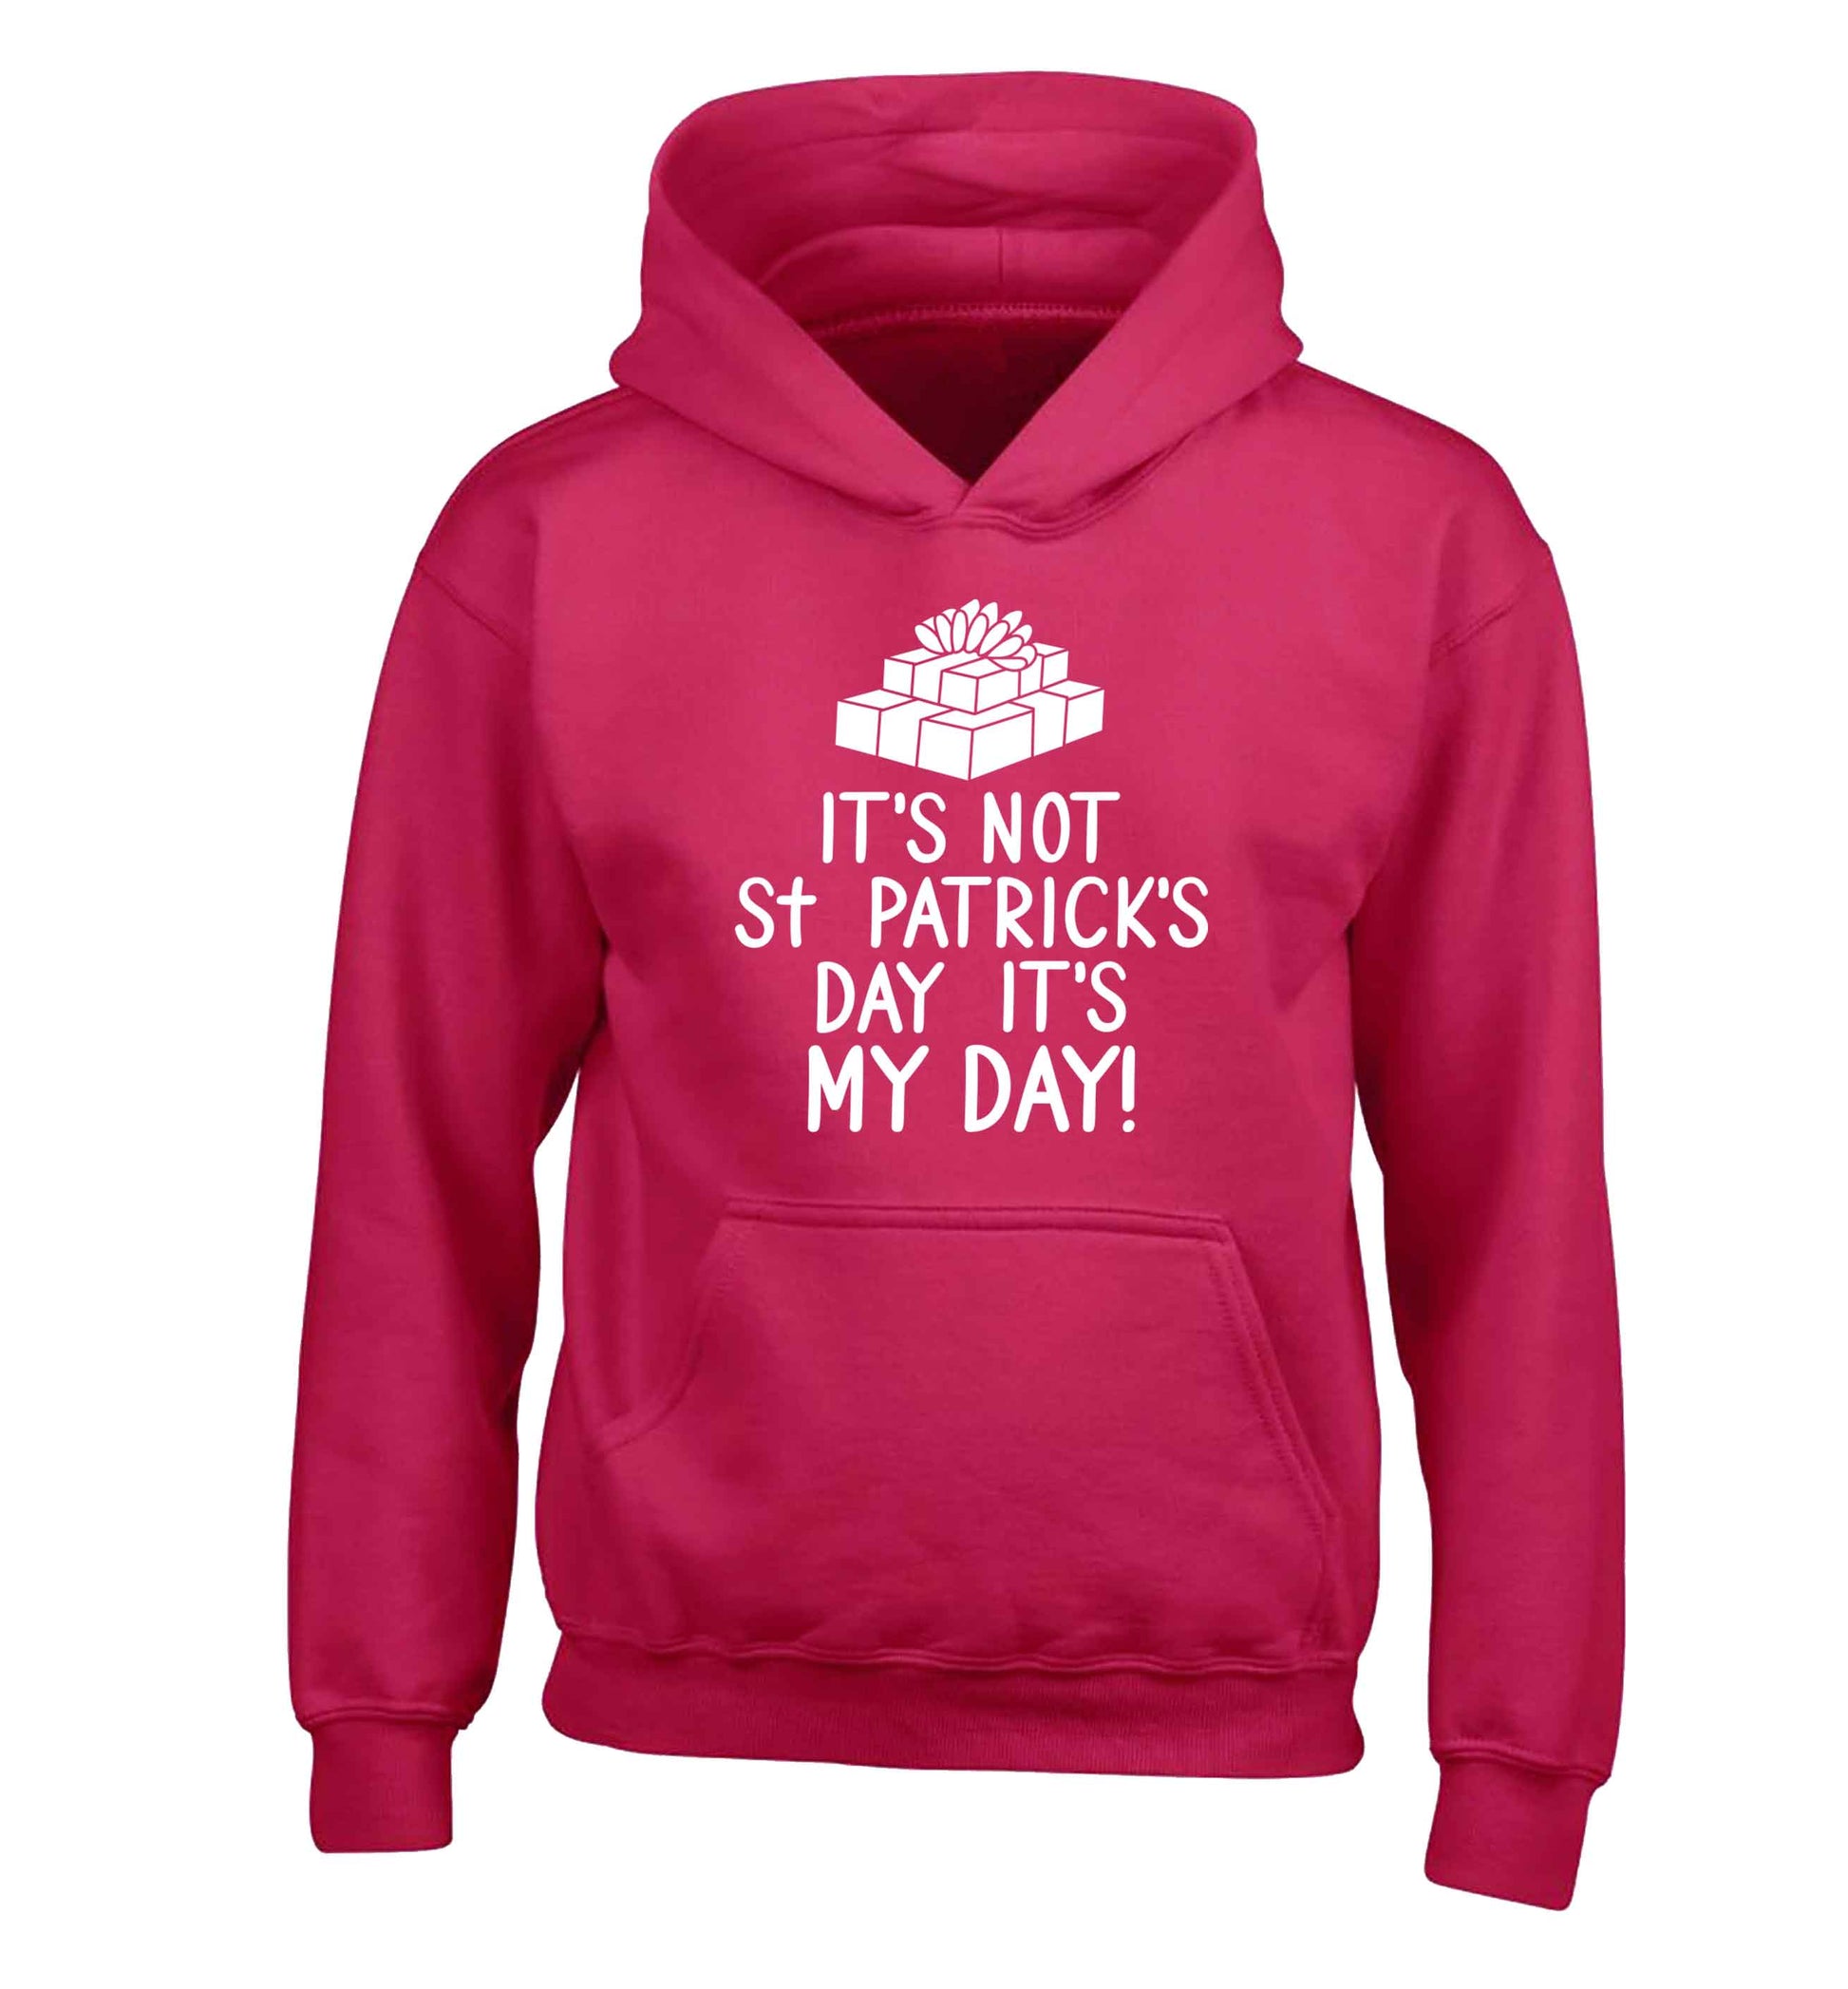 Funny gifts for your mum on mother's dayor her birthday! It's not St Patricks day it's my day children's pink hoodie 12-13 Years